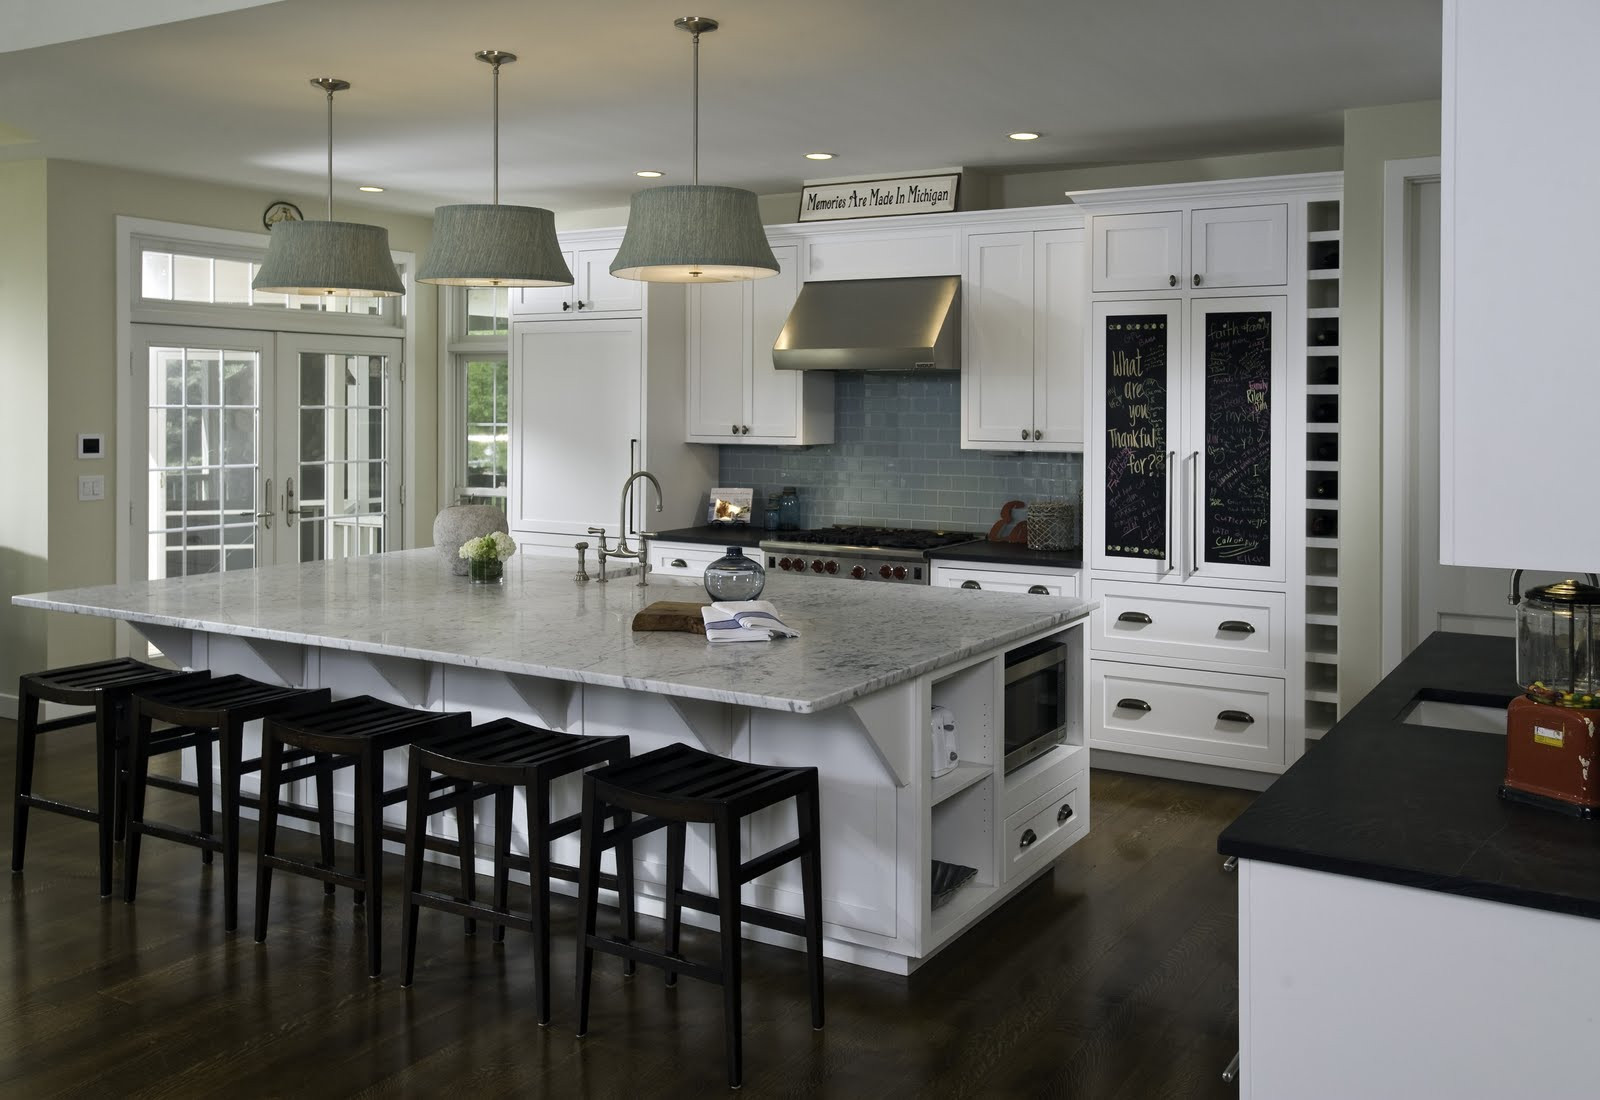 Kitchen Islands With Storage
 Kitchen Islands with Seating And Storage That Will